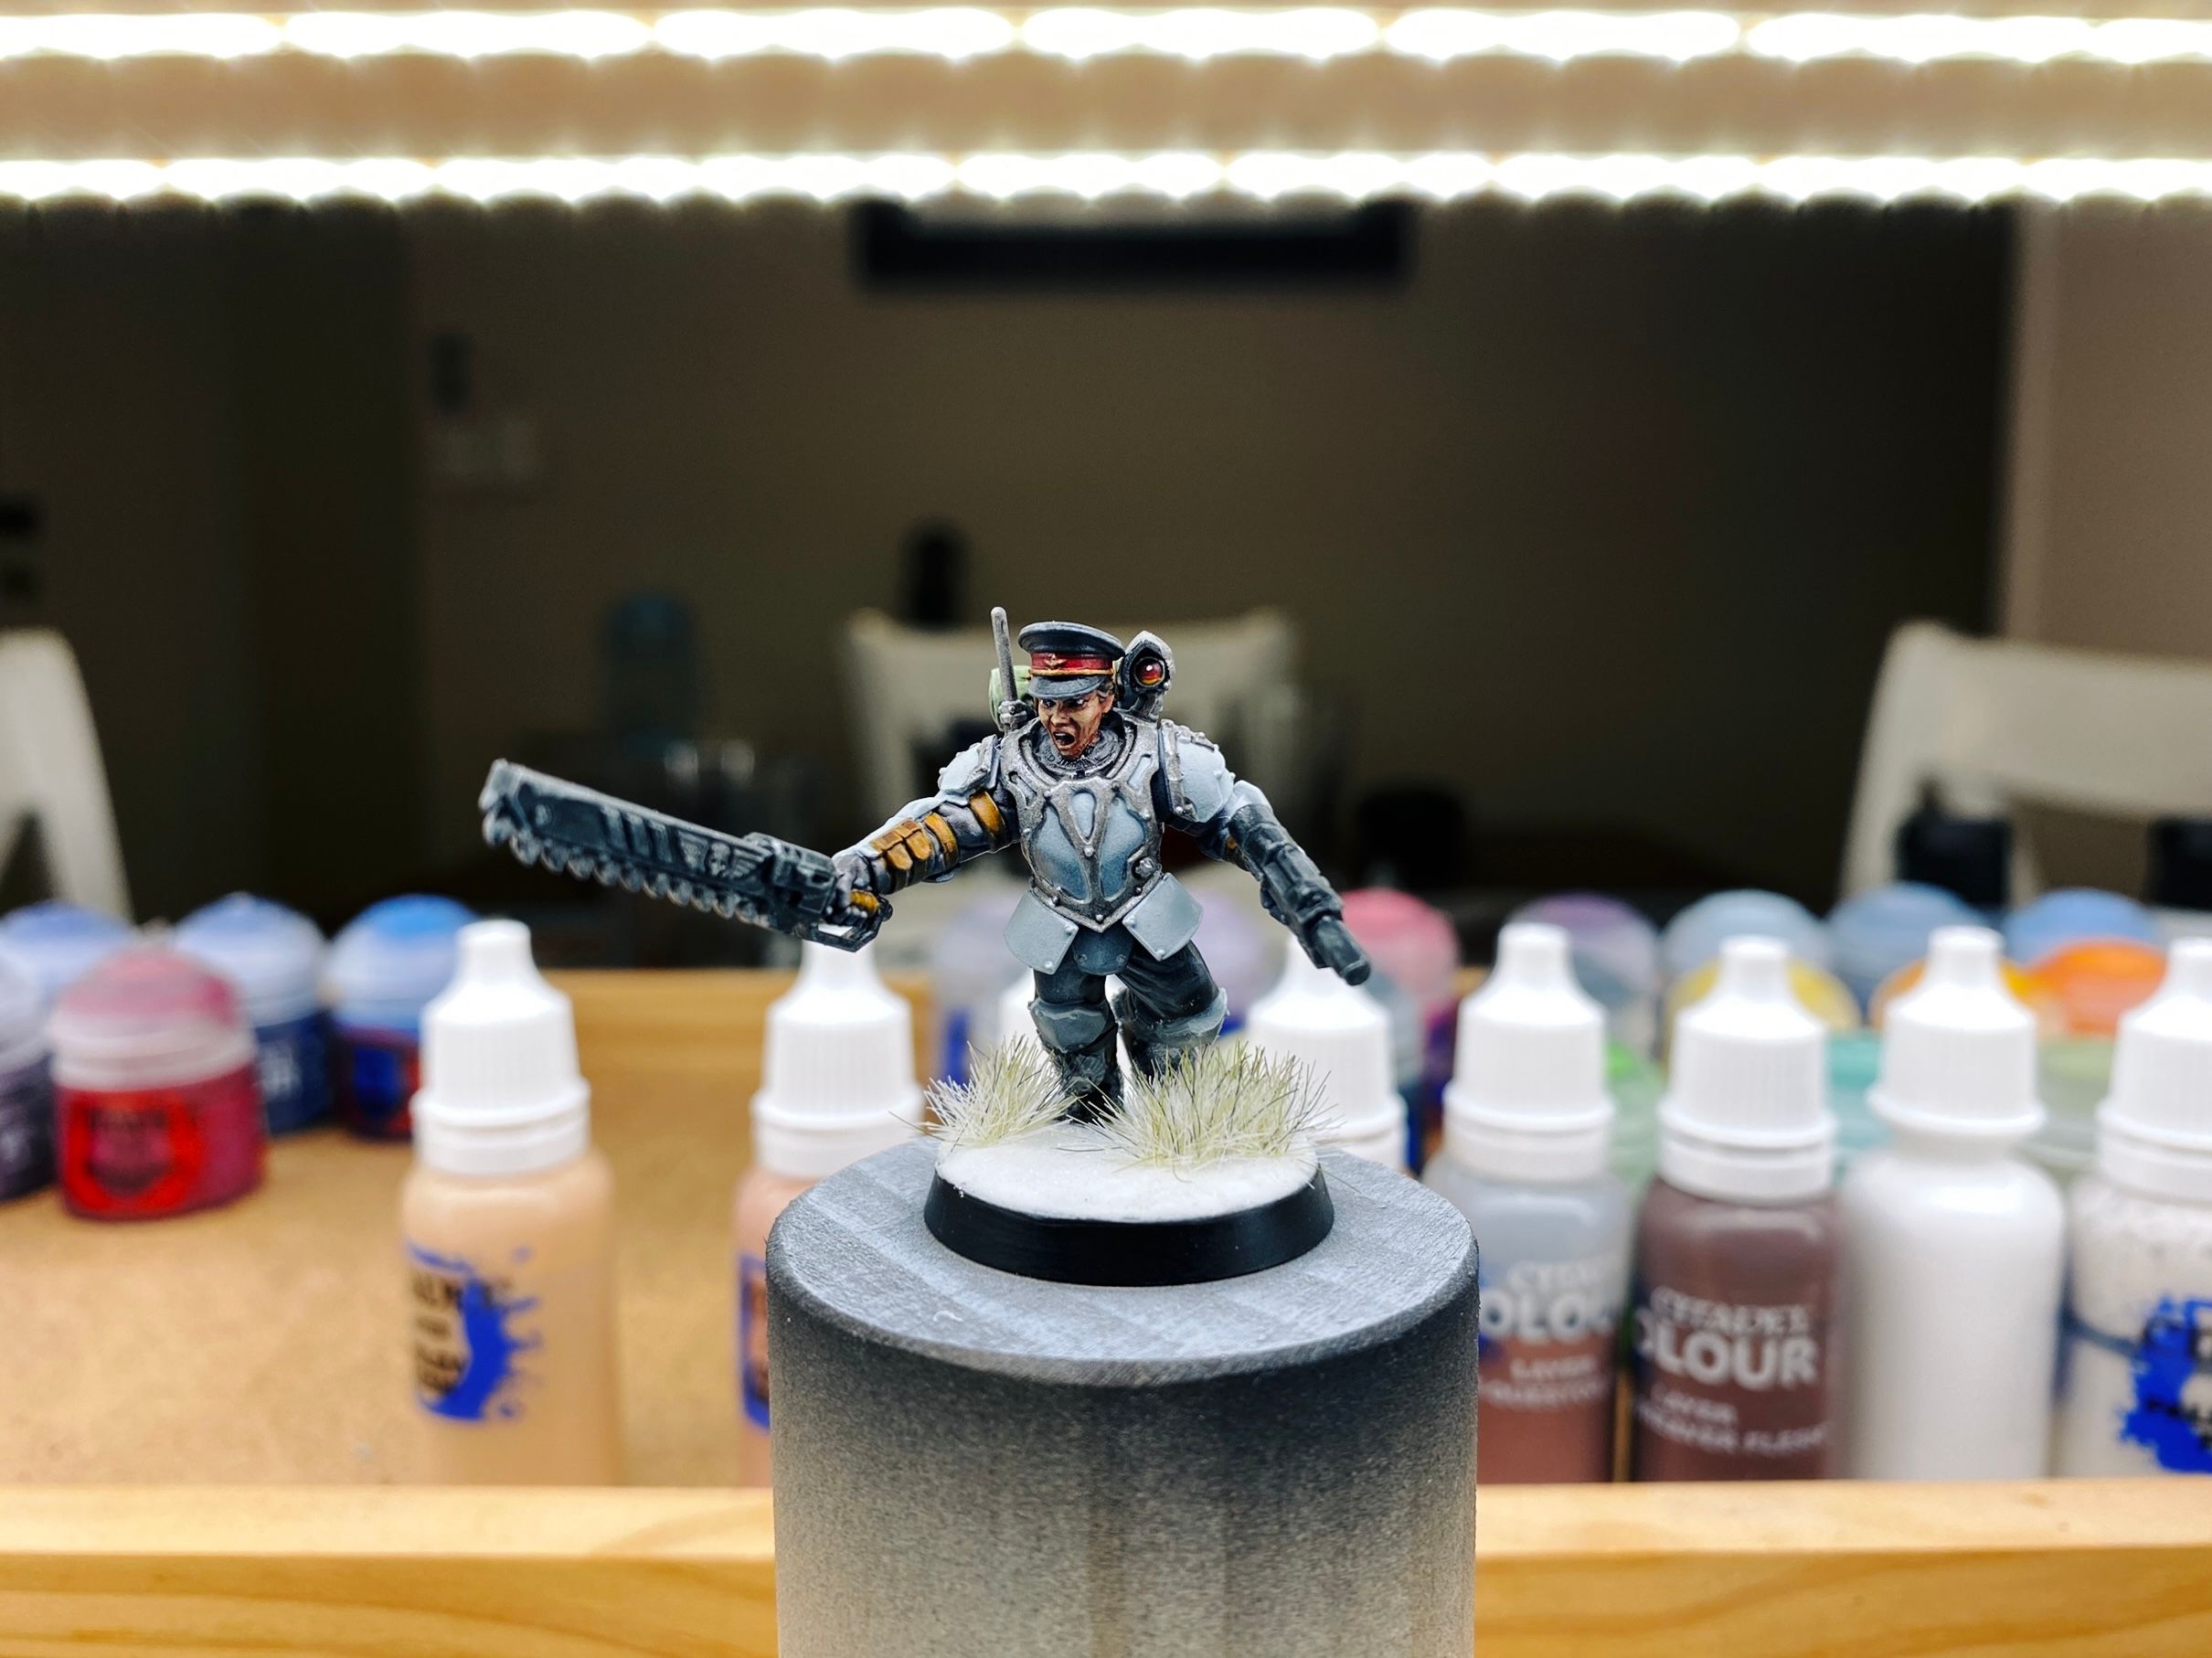 A photo of an Astra Militarum Scion from Warhammer 40,000, basically a regular human trooper except I've replaced the regular male head with a third-party female one that has a military cap on. She's got her mouth open like she's yelling, and is wielding a chainsword and laspistol. The base is all done and looks like snow and it's got a couple of little winter shrubs on it as well.